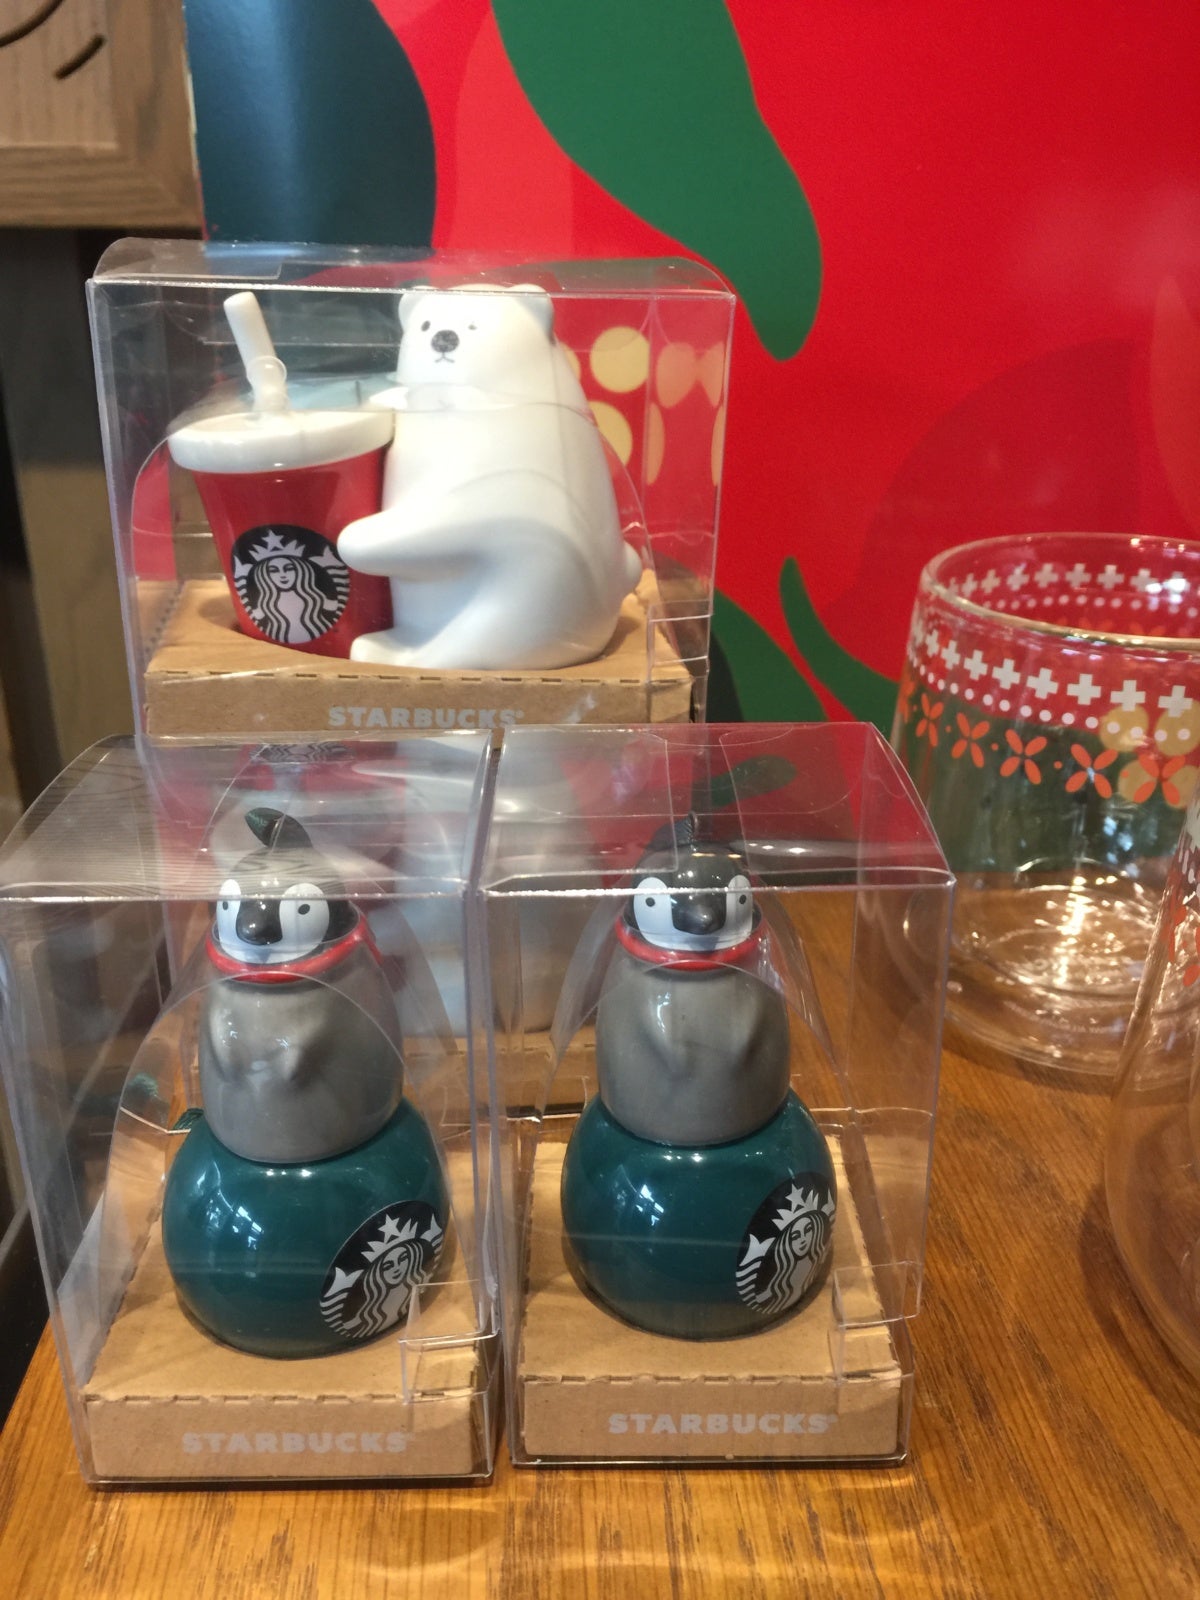 Starbucks M'sia New Holiday Collection Out on Nov 5 Is Adorned with Super Cute Polar Bears & Penguins! - WORLD OF BUZZ